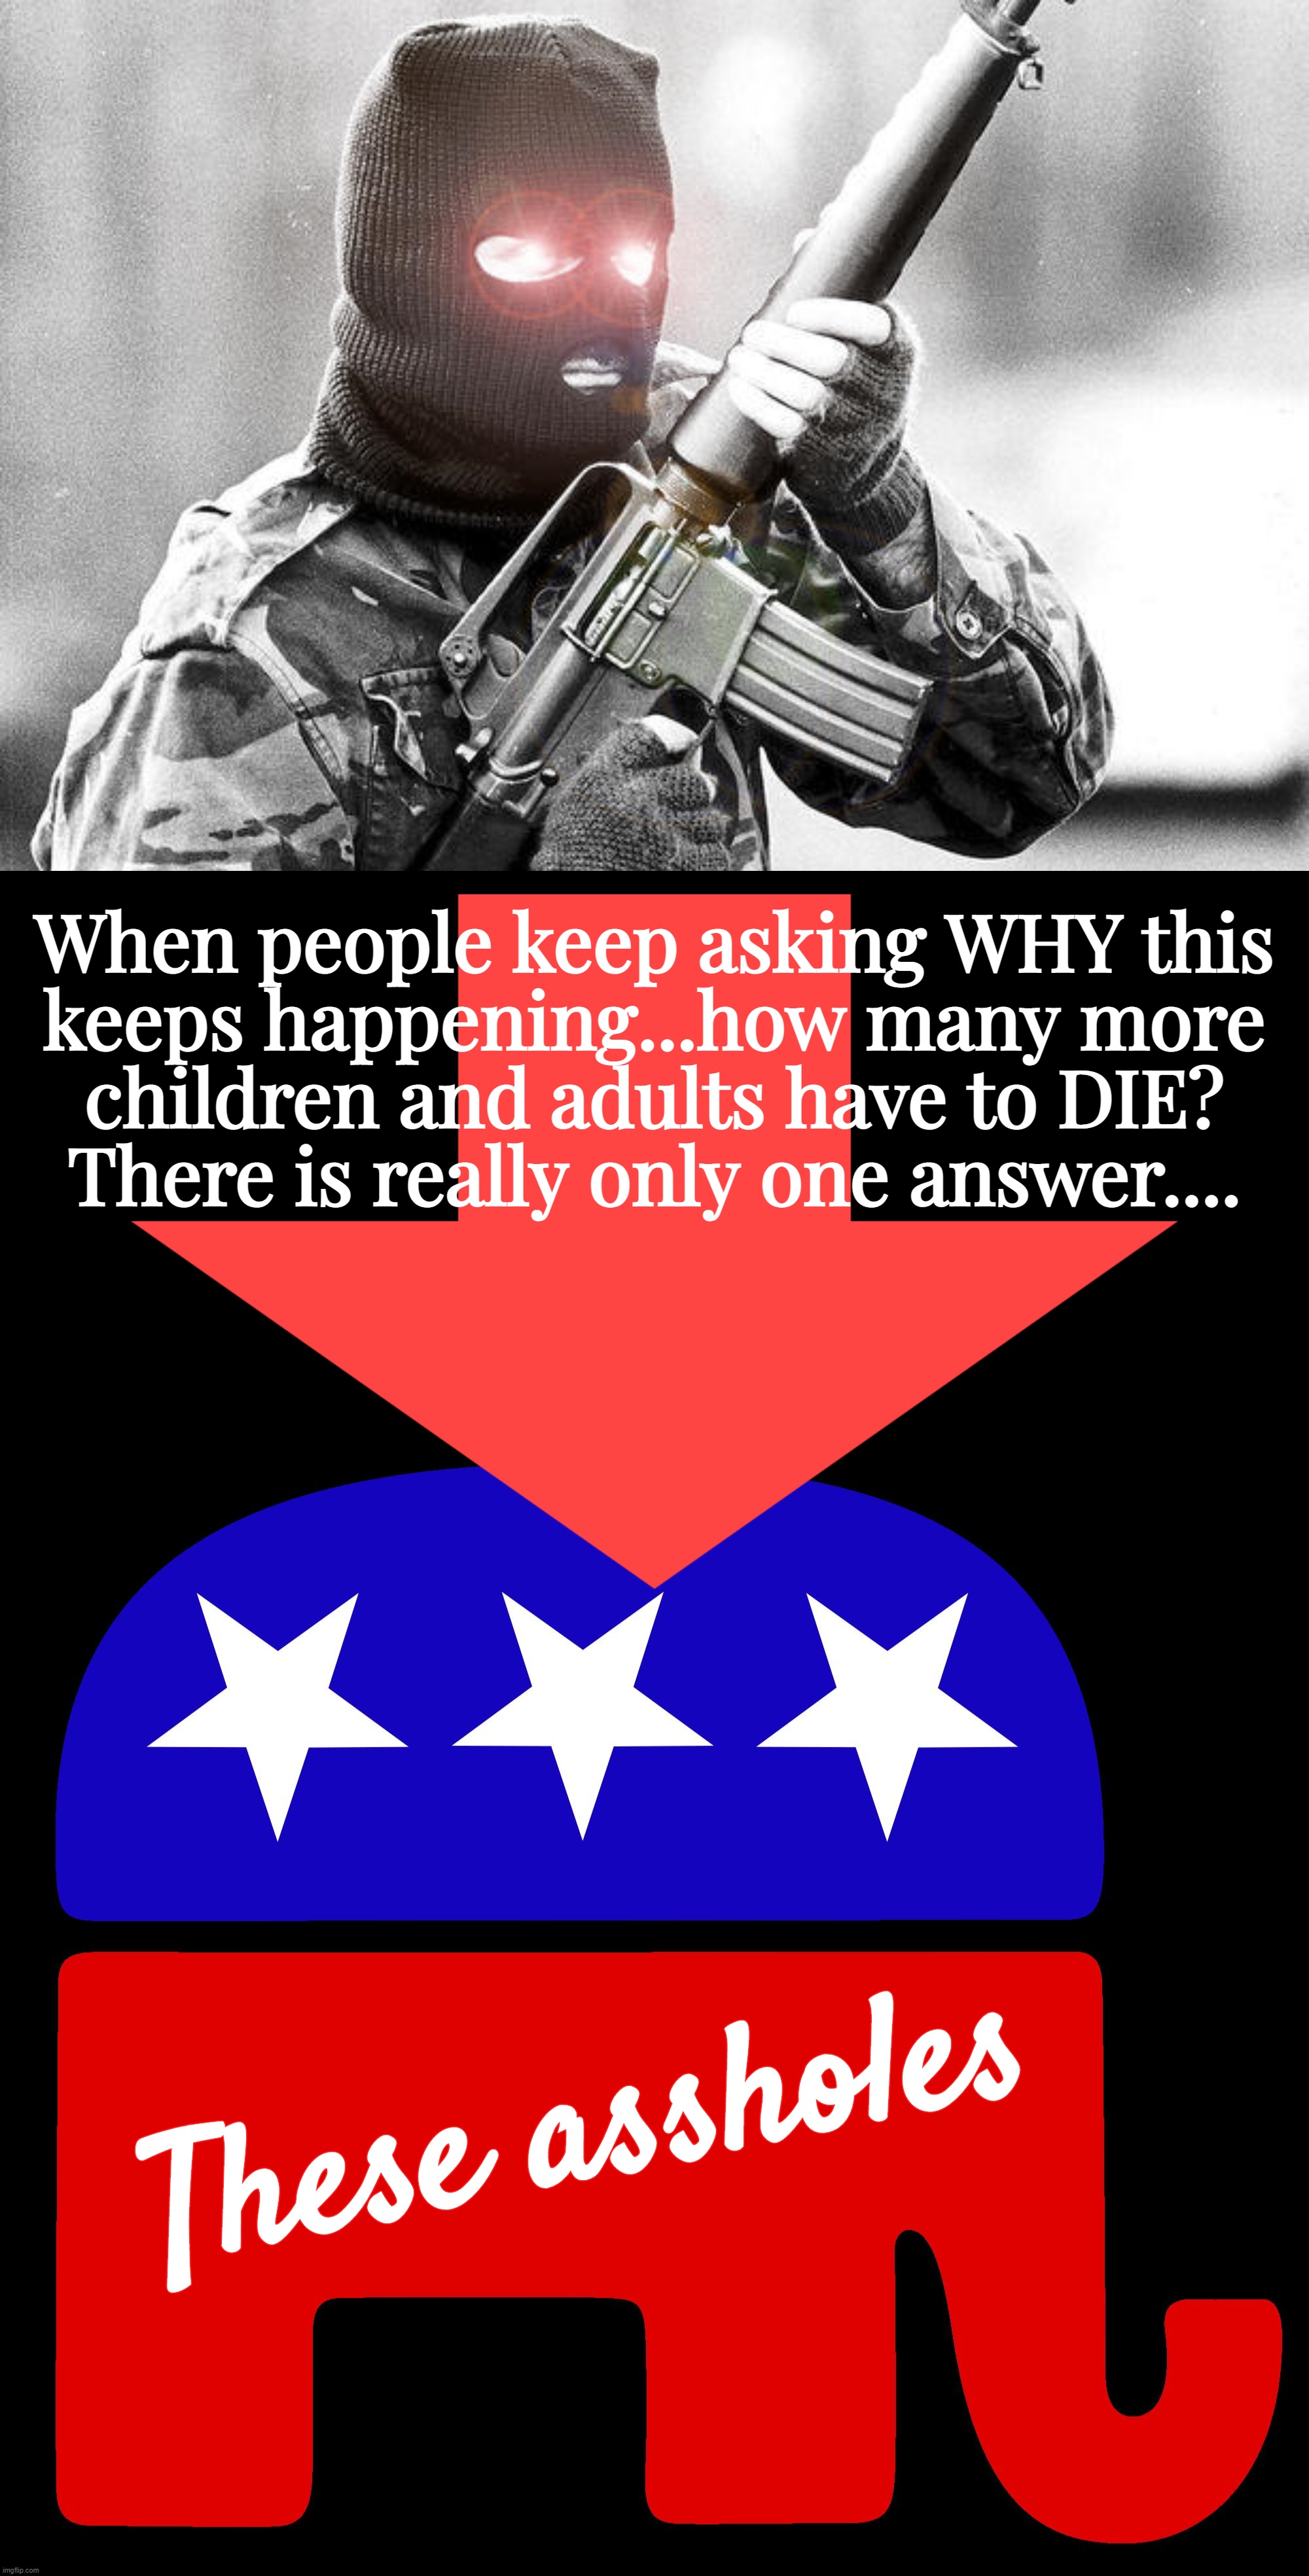 fuuuuuuuuuuuuuuuuuuucku republicans... | When people keep asking WHY this
keeps happening...how many more
children and adults have to DIE?
There is really only one answer.... These assholes | image tagged in republicans,assholes,gun loving conservative,killing,children,daily | made w/ Imgflip meme maker